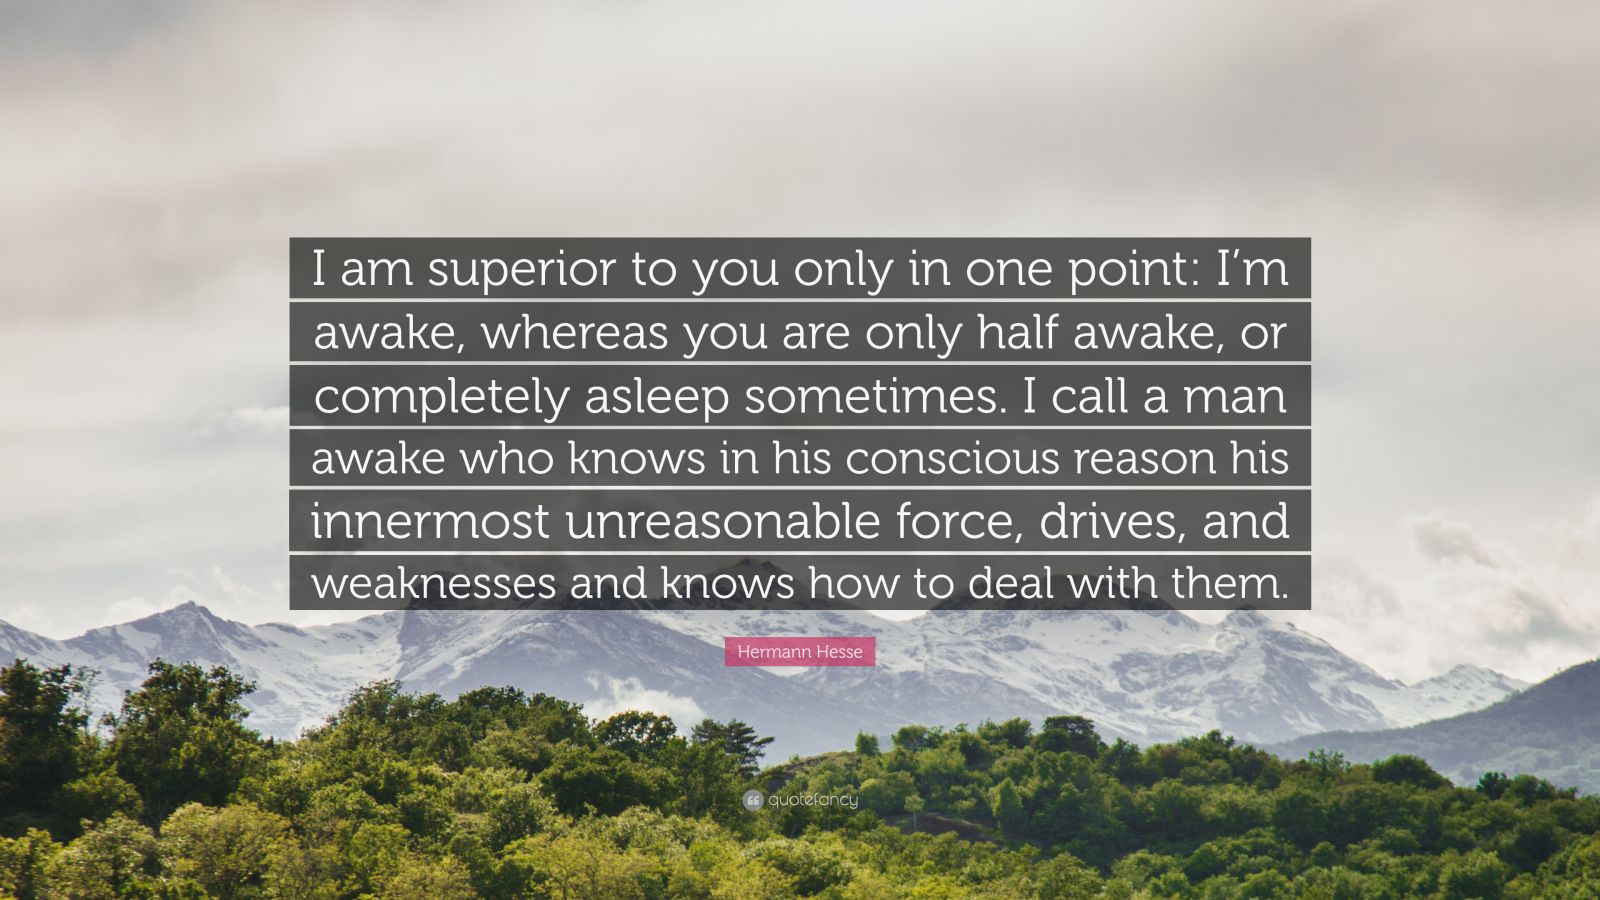 Hermann Hesse Quote: “I am superior to you only in one point: I'm awake,  whereas you are only half awake, or completely asleep sometimes. I ca”